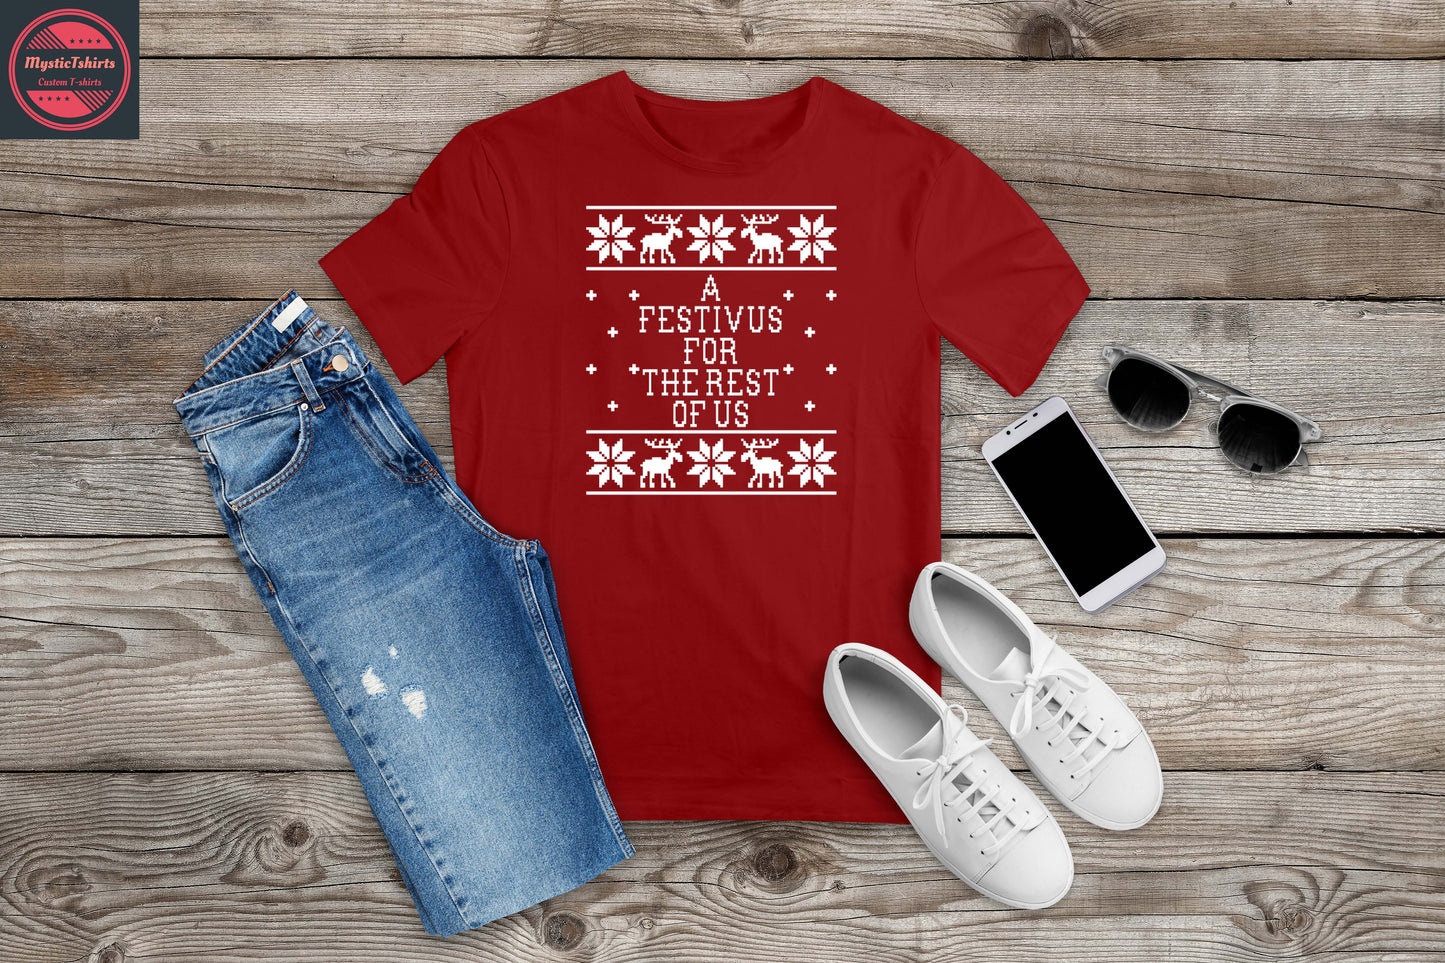 006. A FESTIVUS FOR THE REST OF US, Custom Made Shirt, Personalized T-Shirt, Custom Text, Make Your Own Shirt, Custom Tee